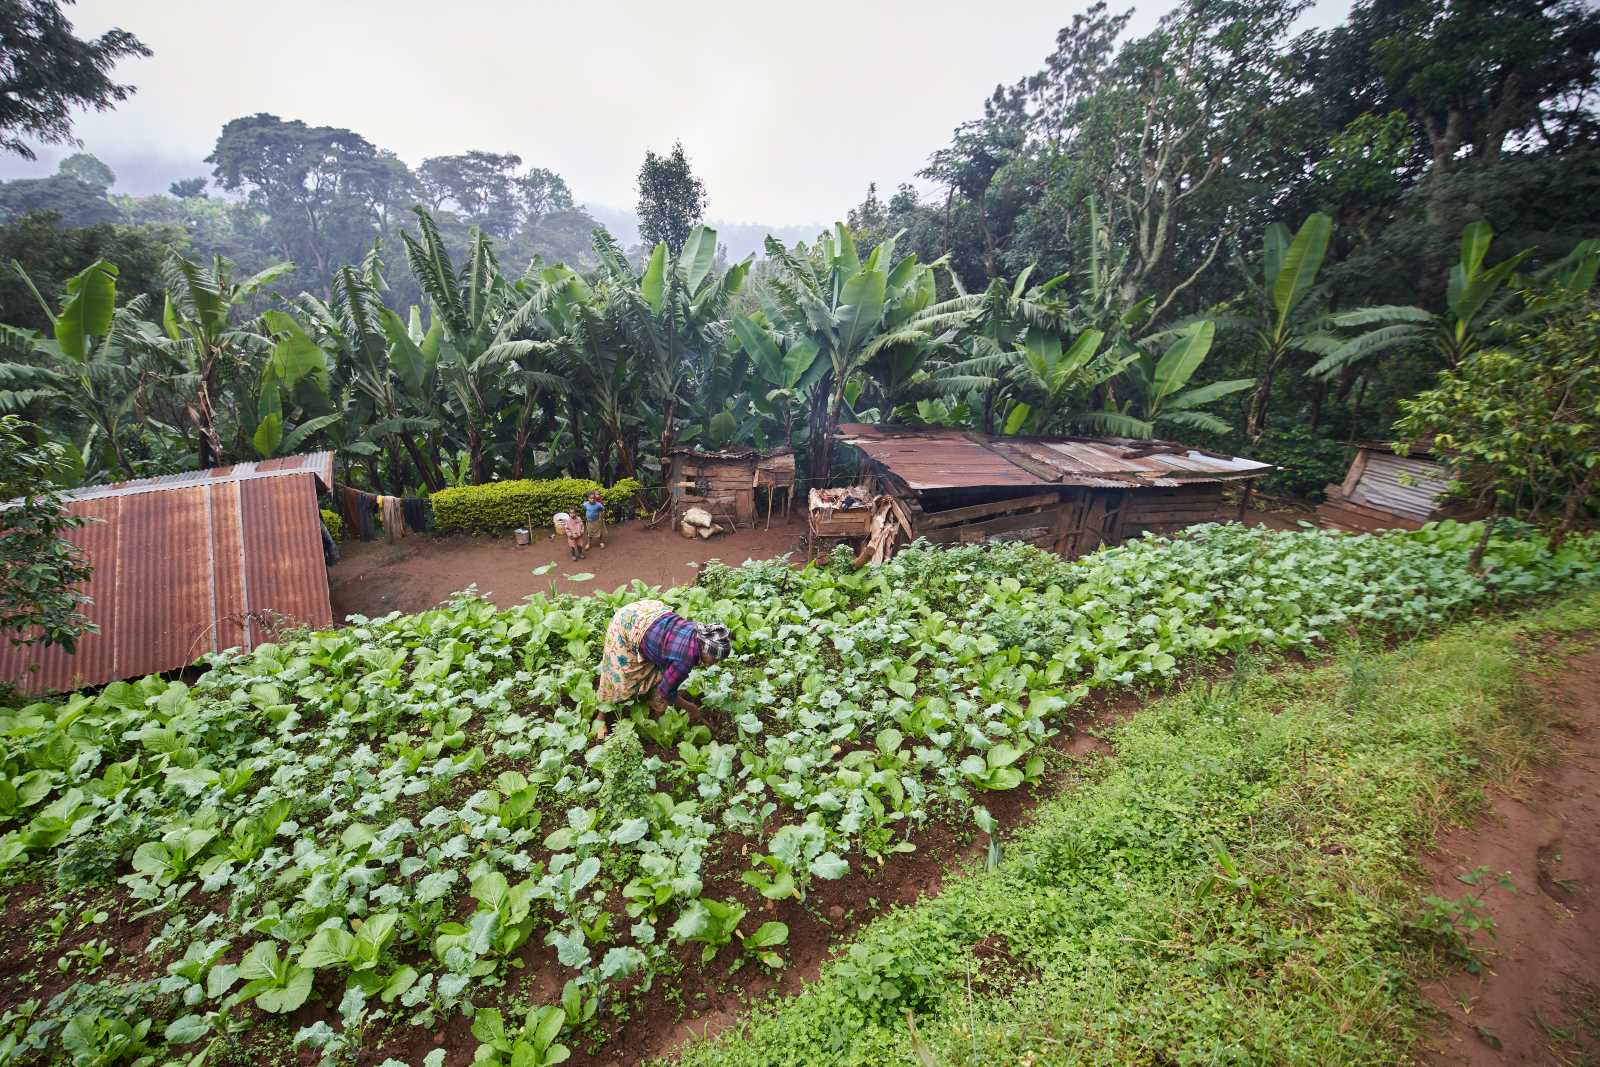 Small, but highly diversitfied agro-forestry farm on a slope of Mount Kilimanjaro.